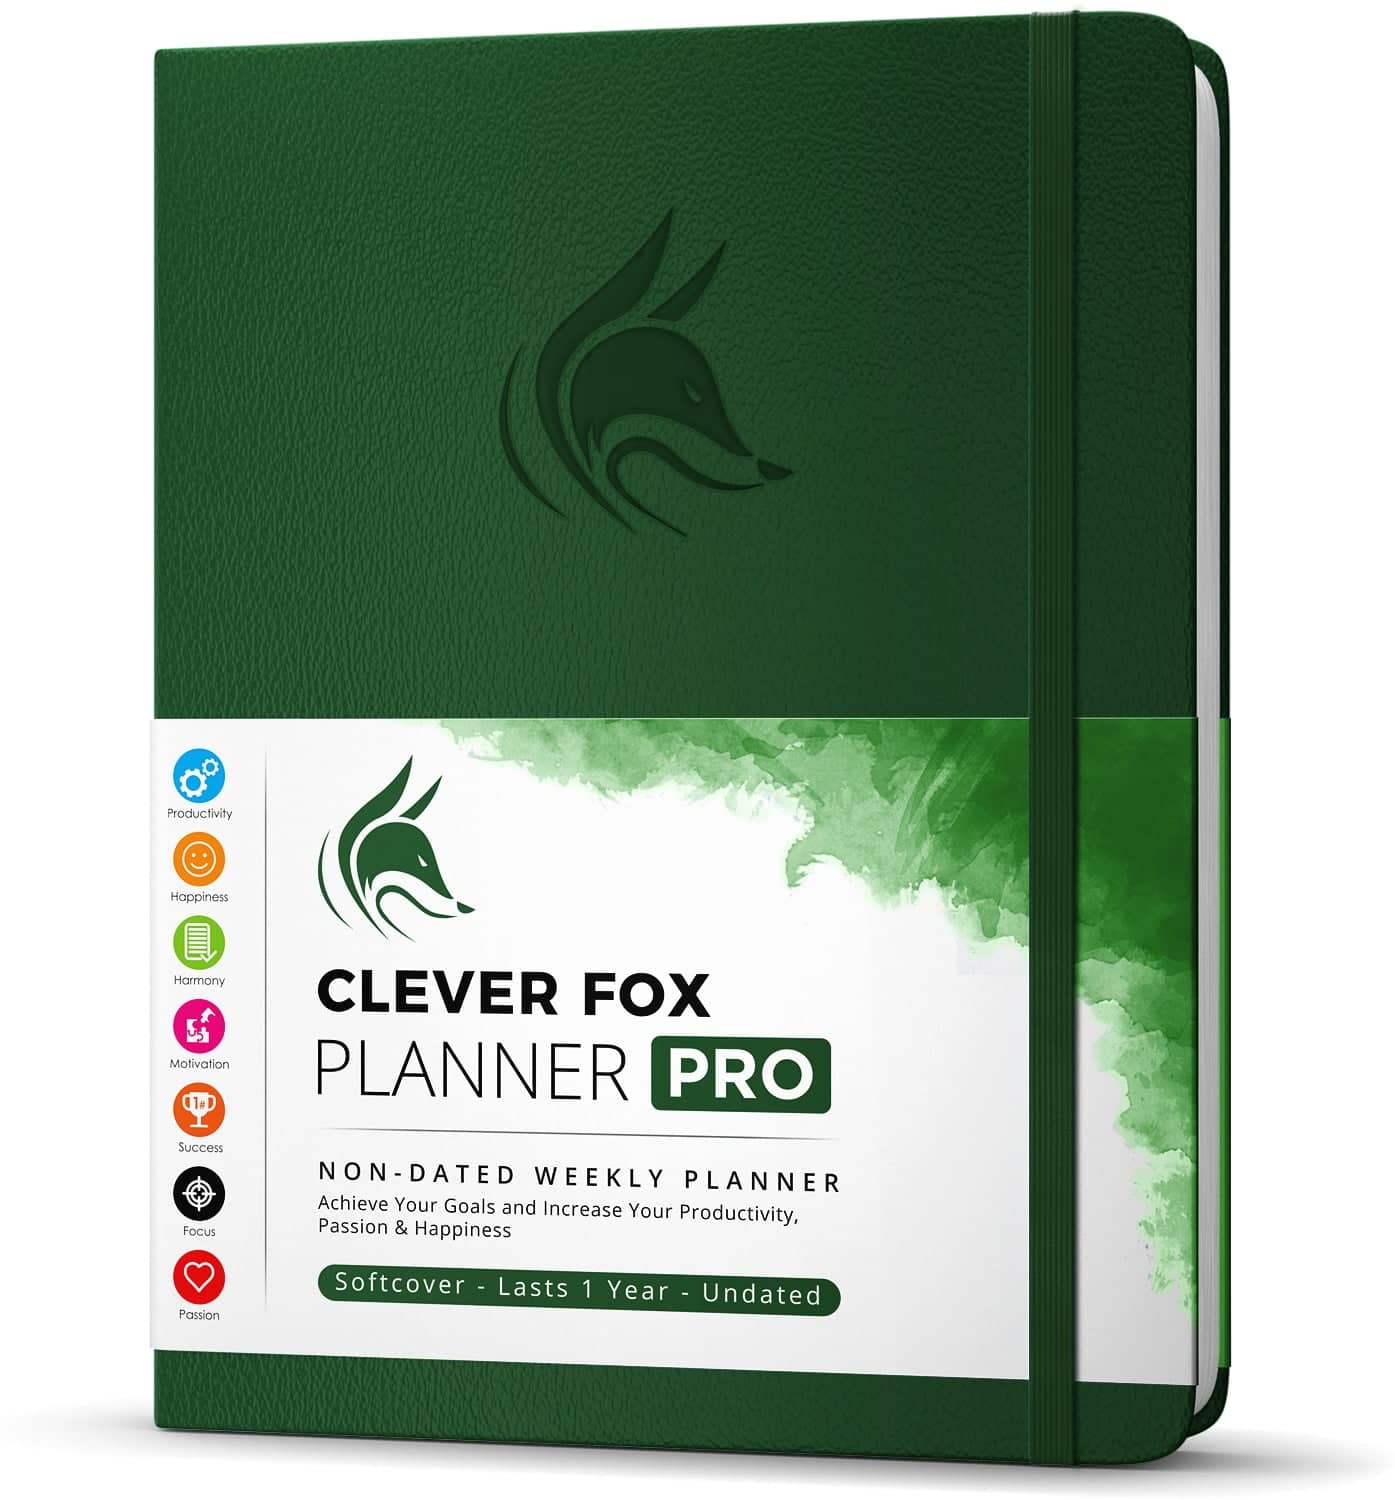 Clever Fox Planner 2nd Edition - Forest Green 